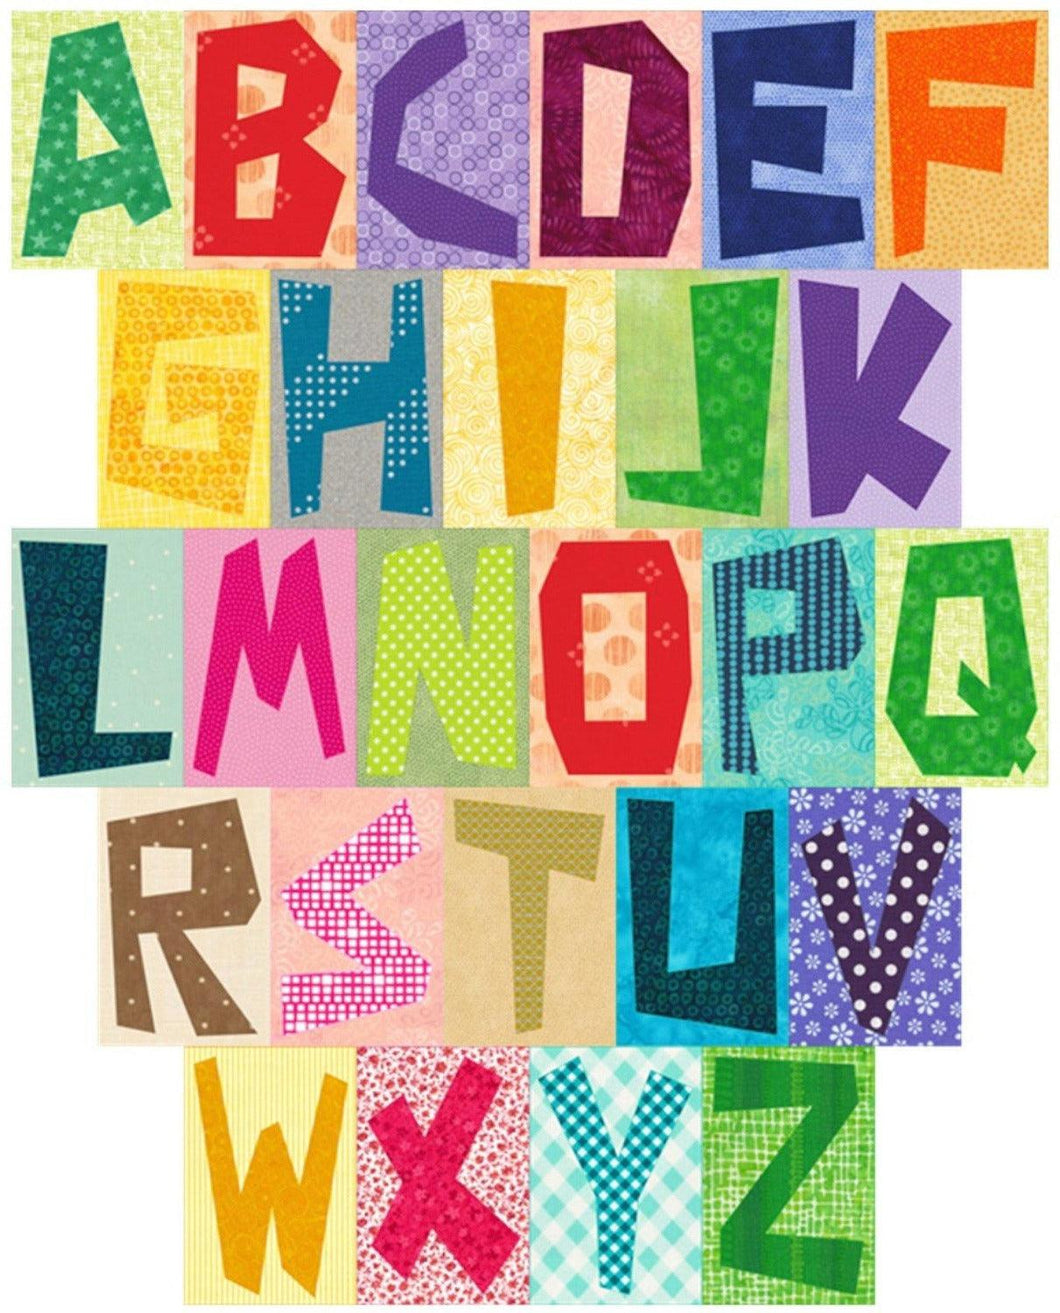 Funky Uppercase Alphabet, Foundation Paper Piecing Pattern (FPP Pattern), Quilt Block, 3 sizes FPP Patterns- Full Bobbin Designs foundation paper piecing patterns quilt block patterns sewing patterns